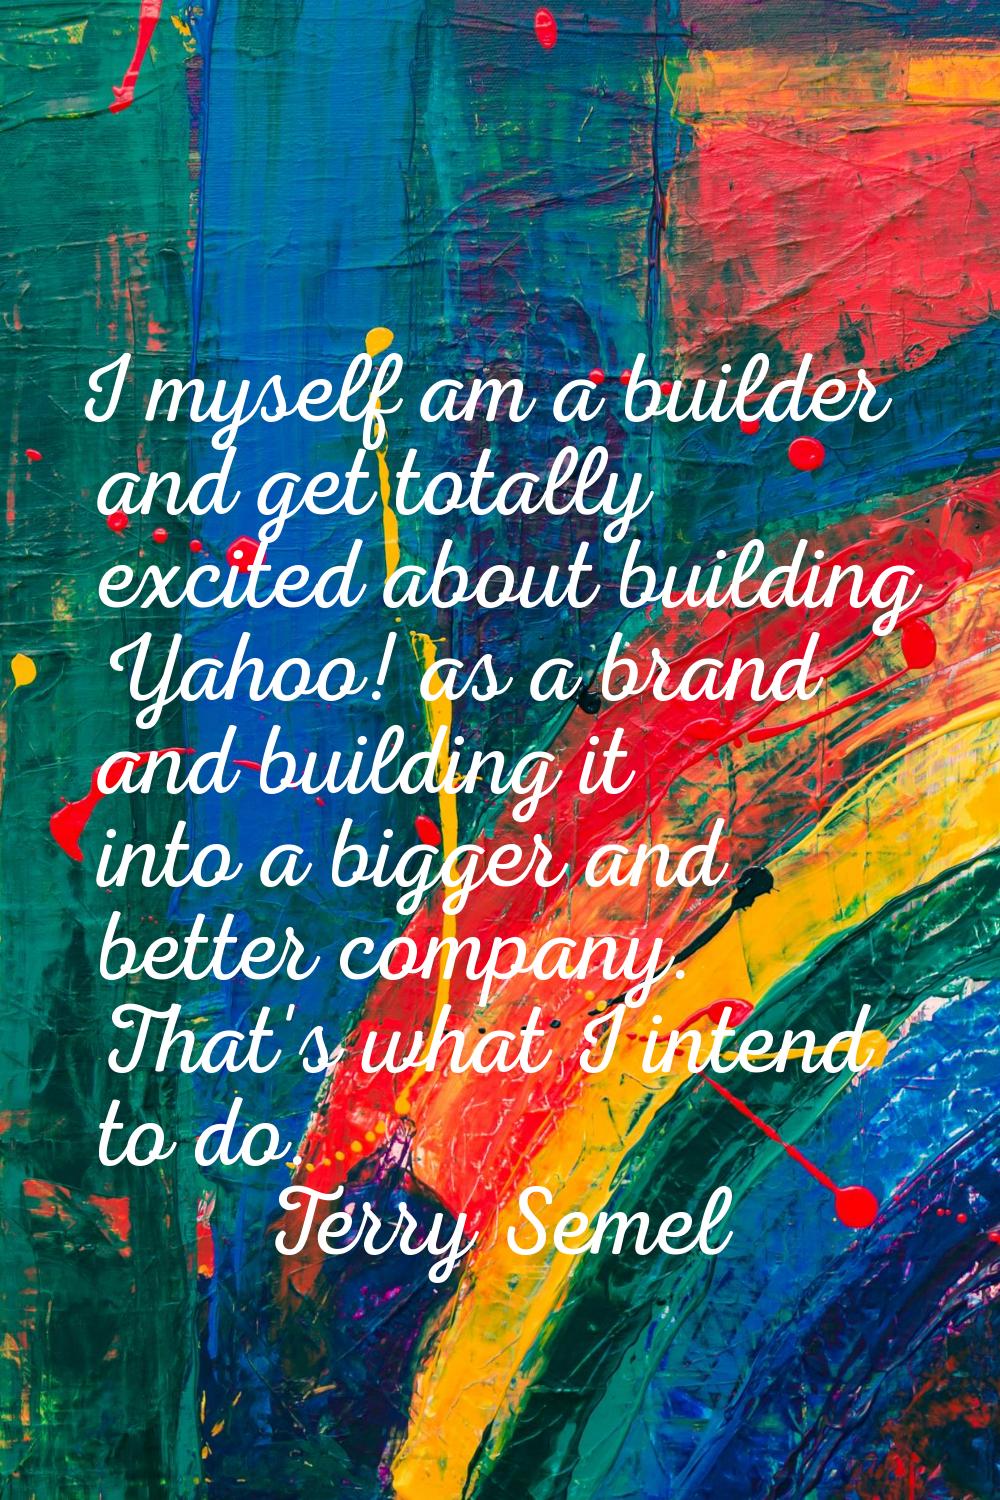 I myself am a builder and get totally excited about building Yahoo! as a brand and building it into